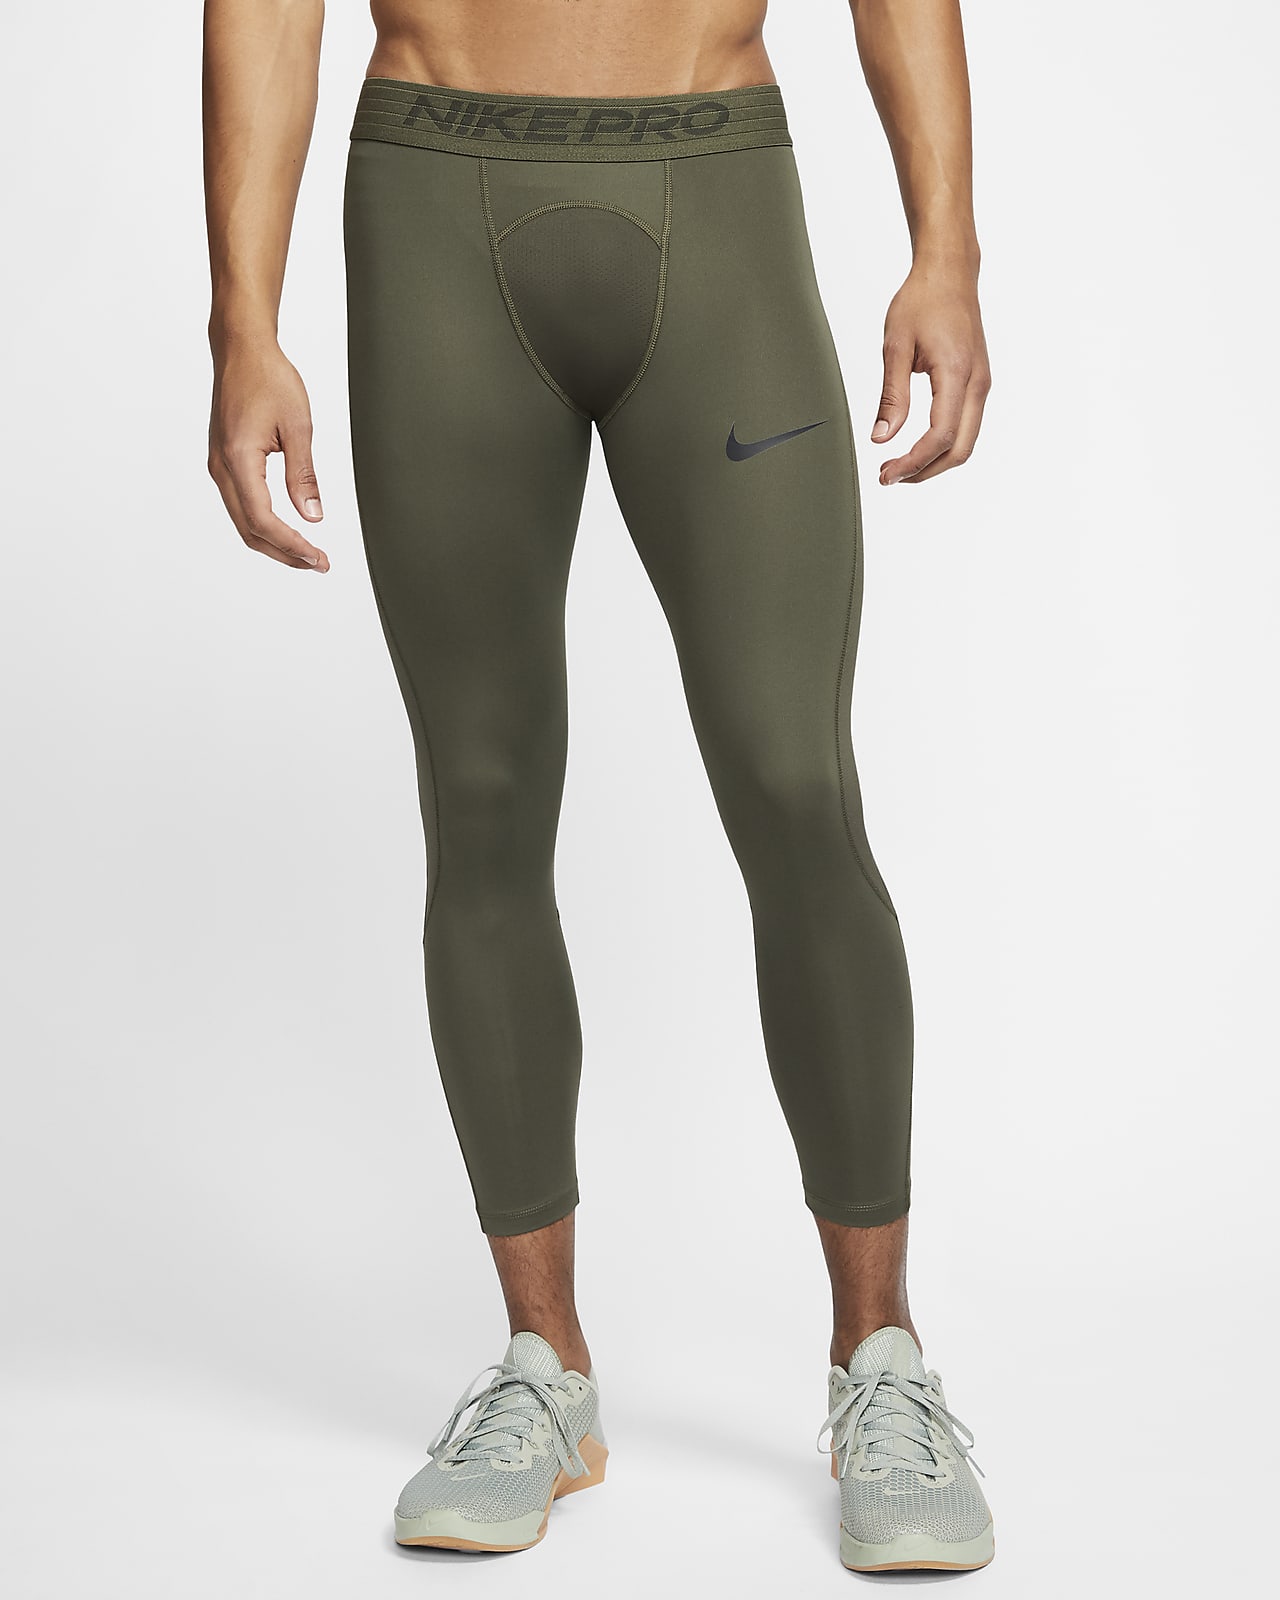 Purchase \u003e green nike tights, Up to 64% OFF